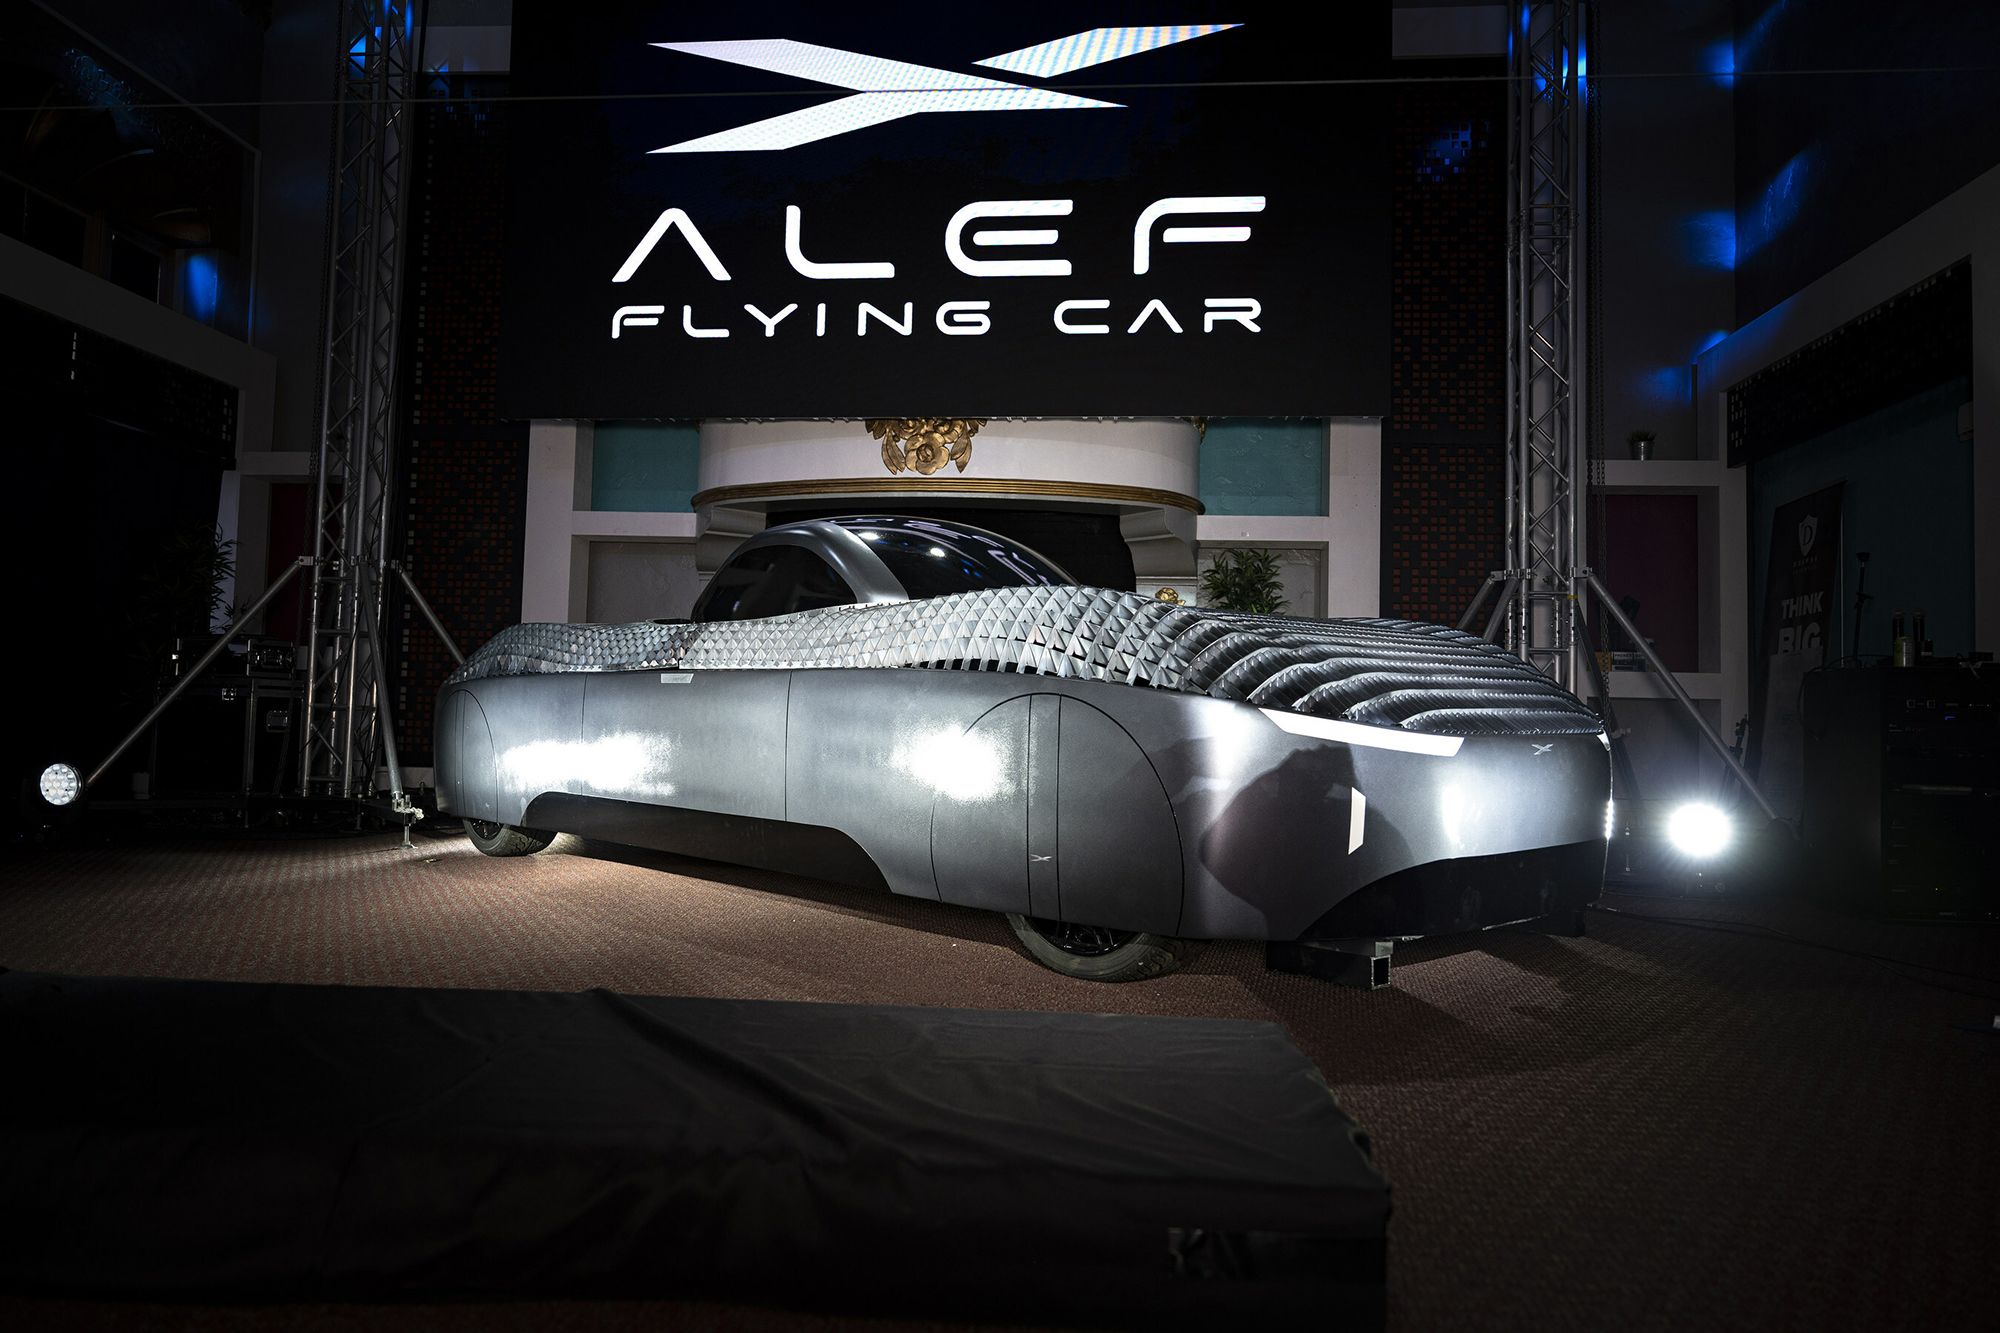 Alef Automotive's flying car prototype just got an airworthiness  certificate from the FAA